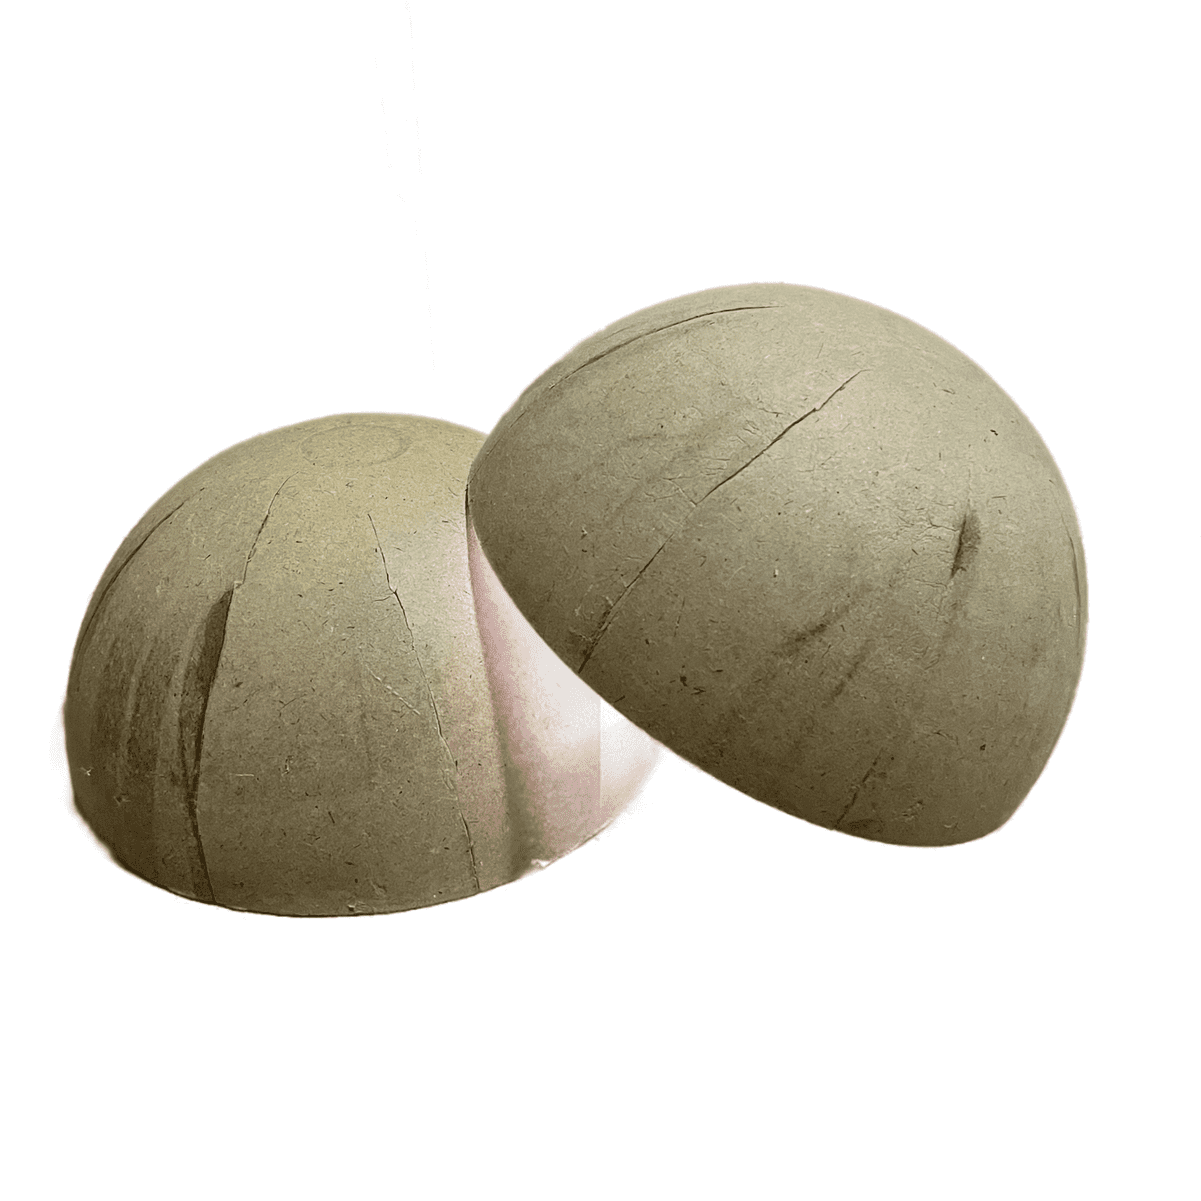 1 Set - 10in Paper Ball Shell Casing